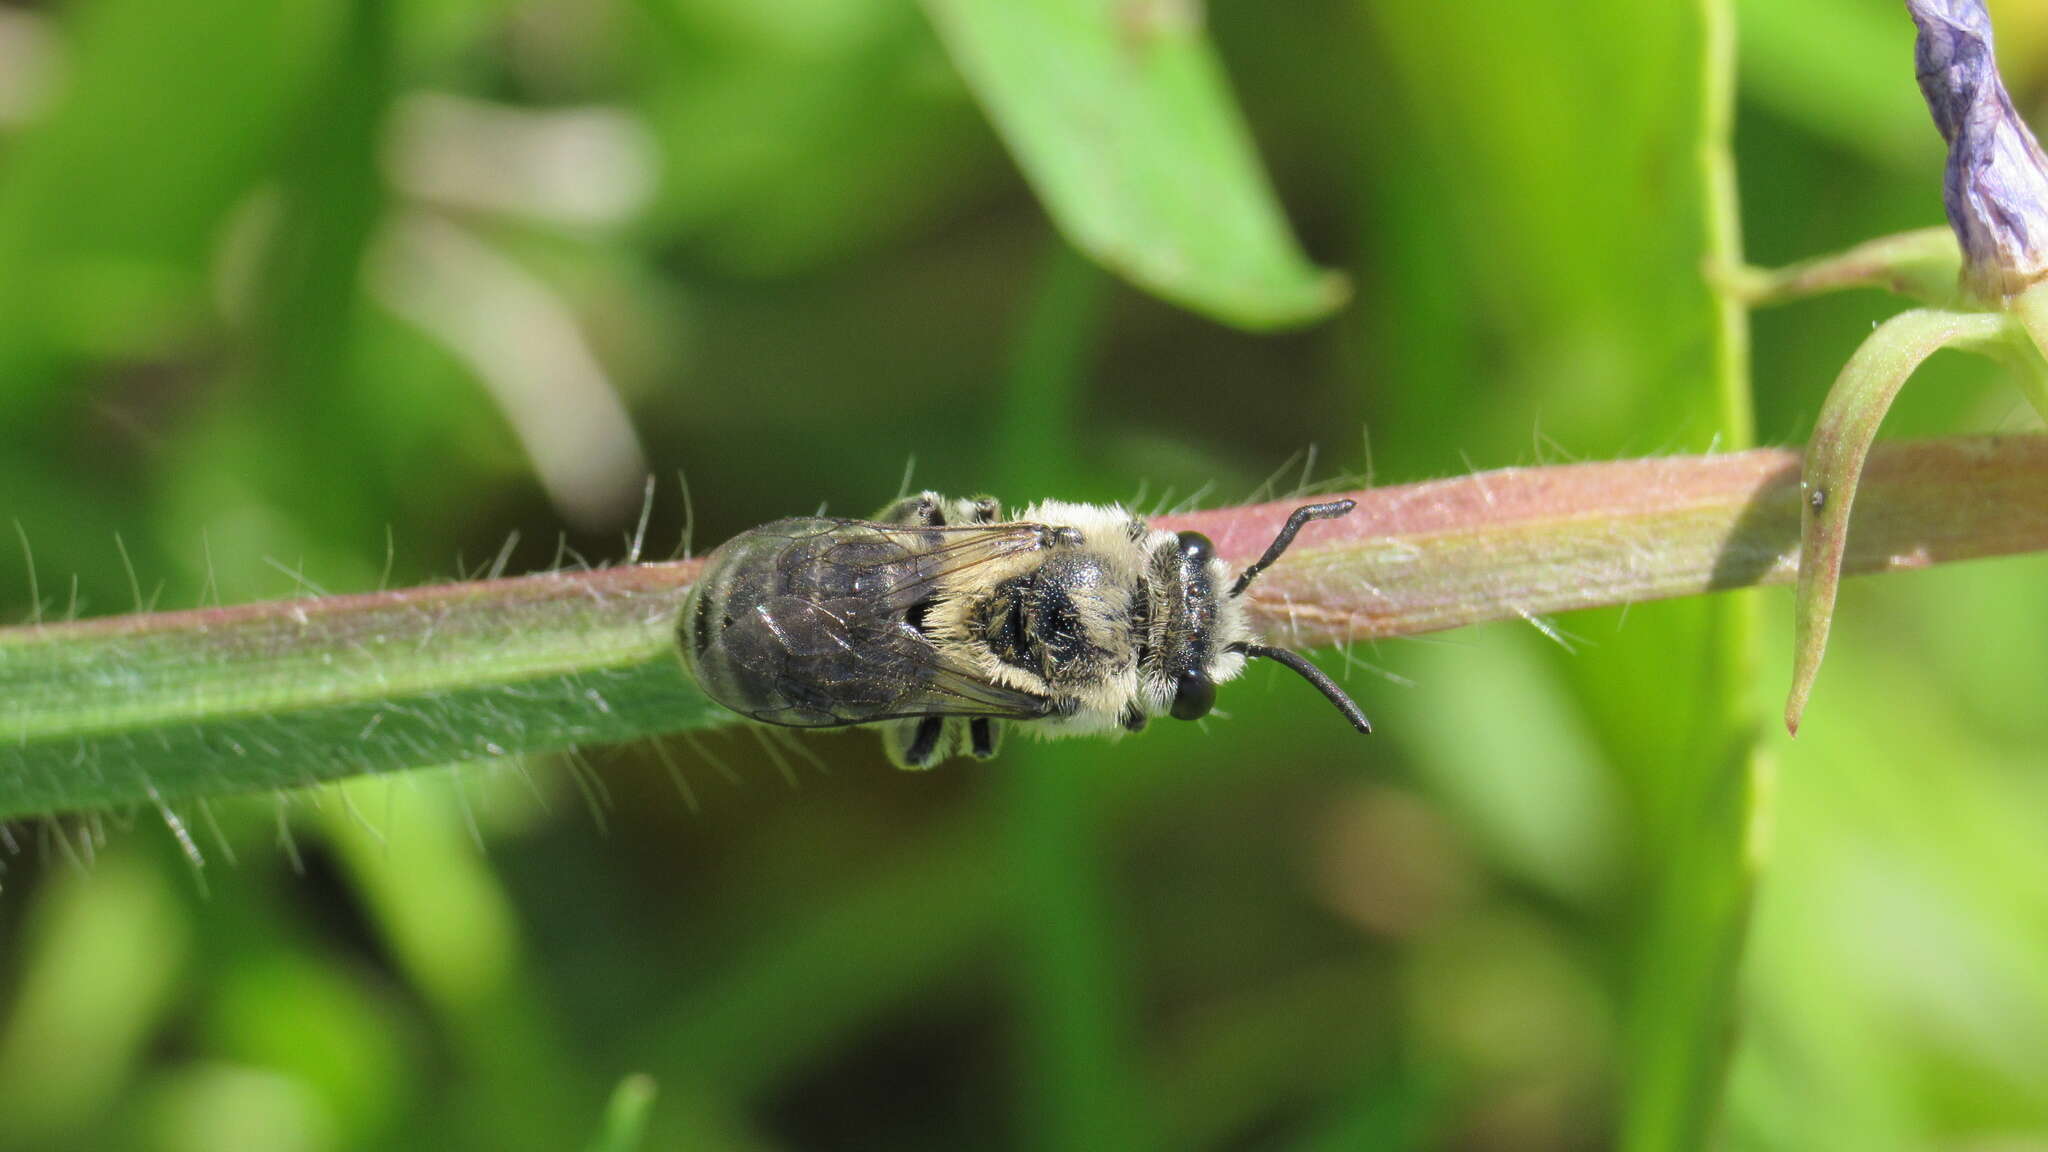 Image of Colletes titusensis Mitchell 1951